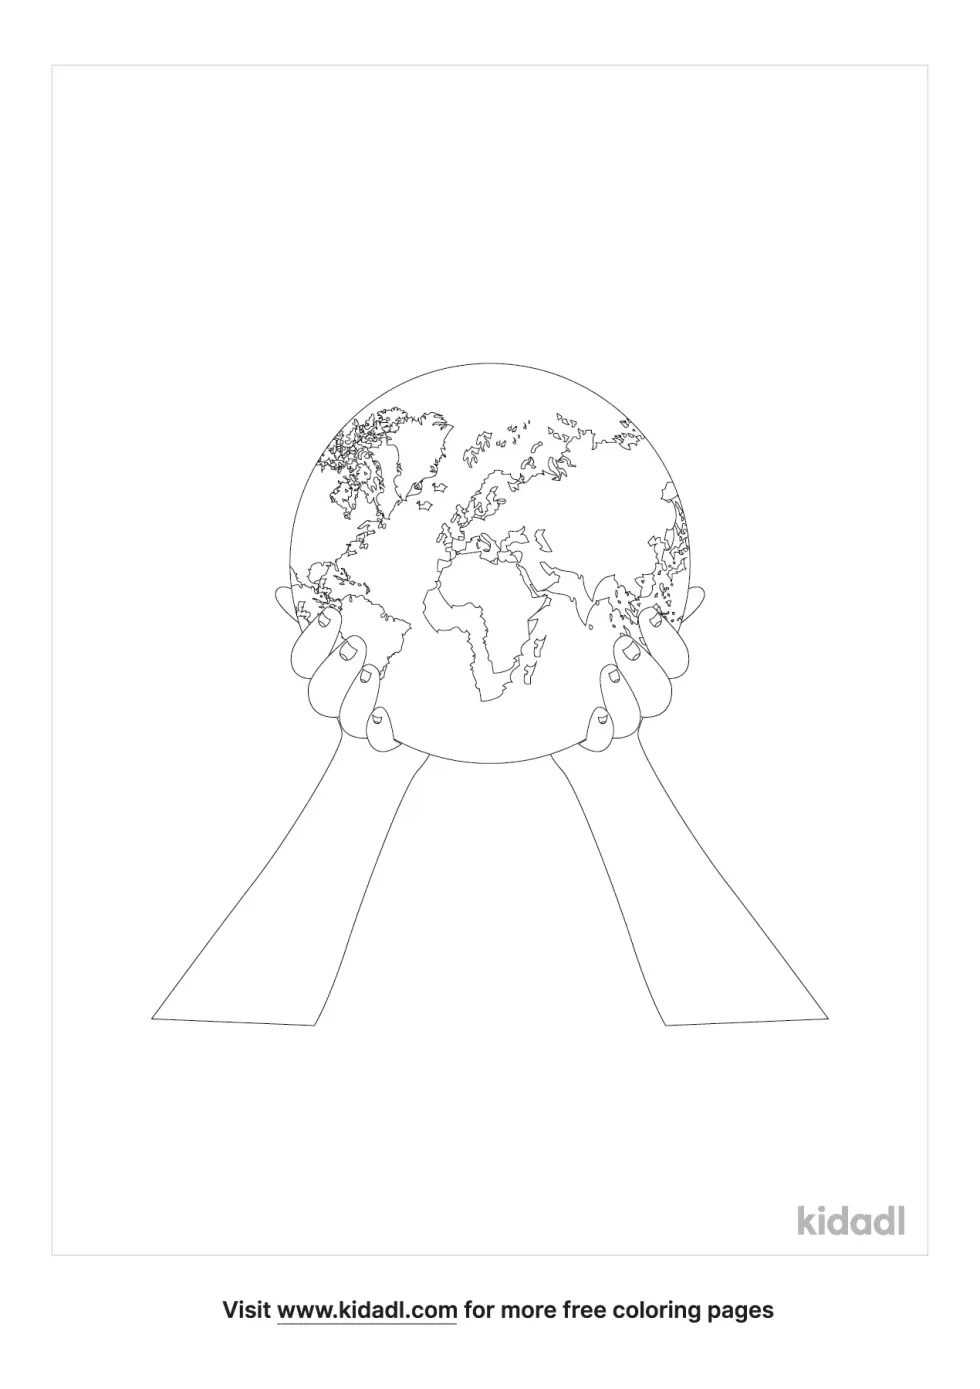 Globe In Hands Coloring Page